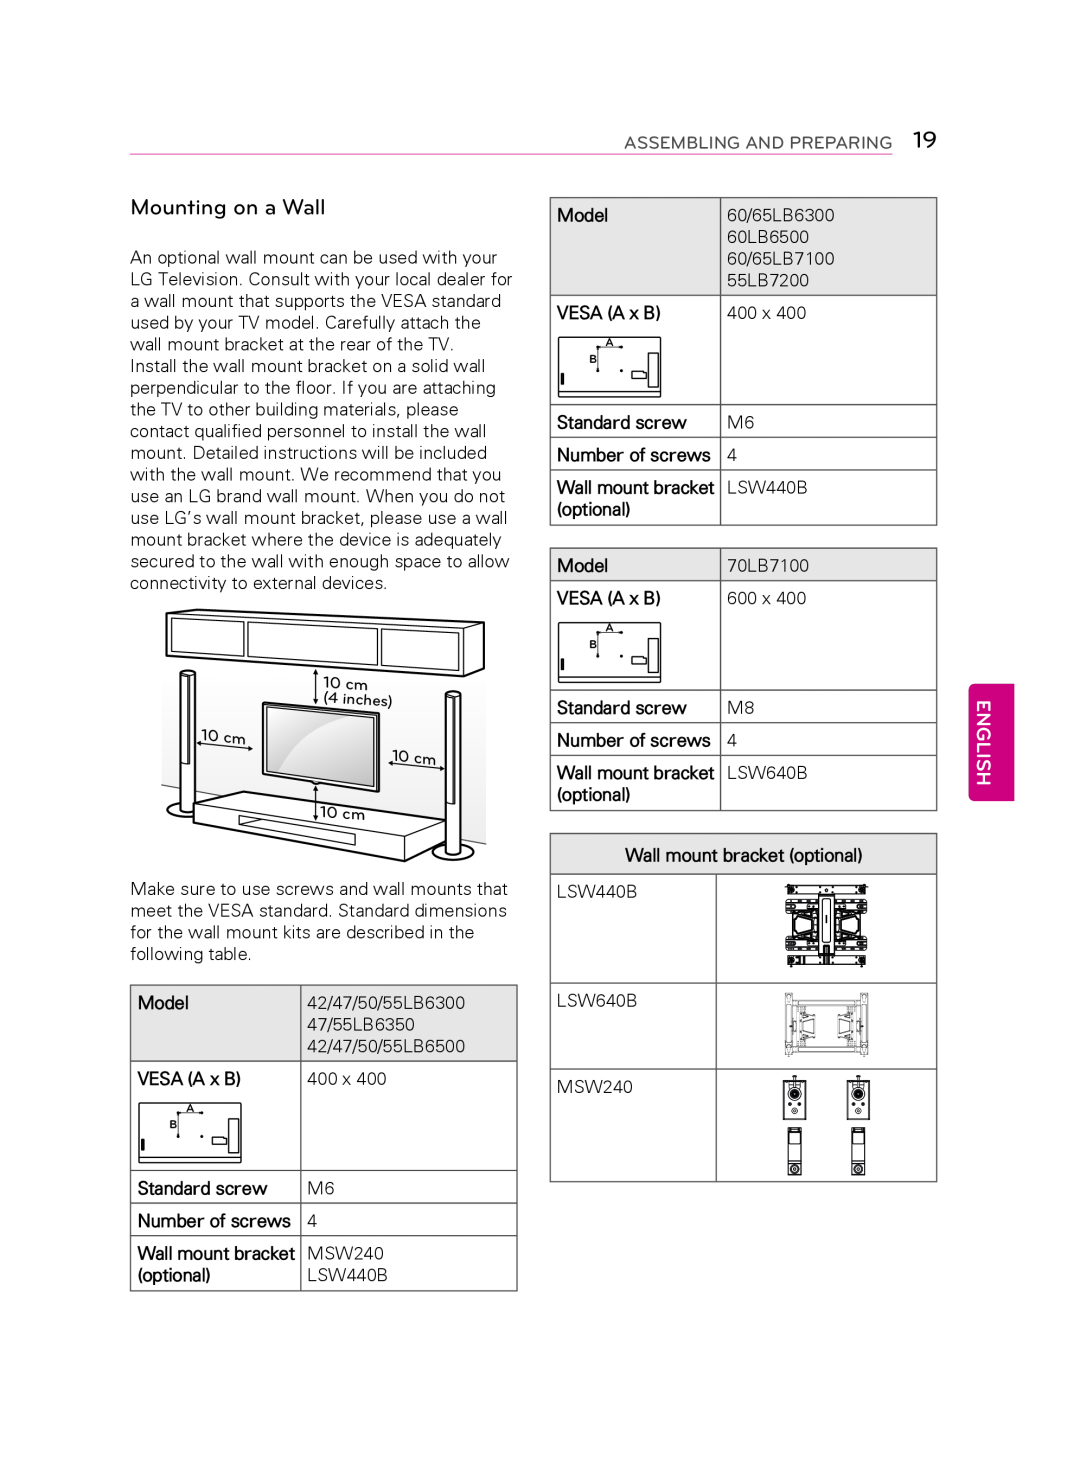 LG Electronics 50LB6300 owner manual English, Mounting on a Wall, Assembling And Preparing 